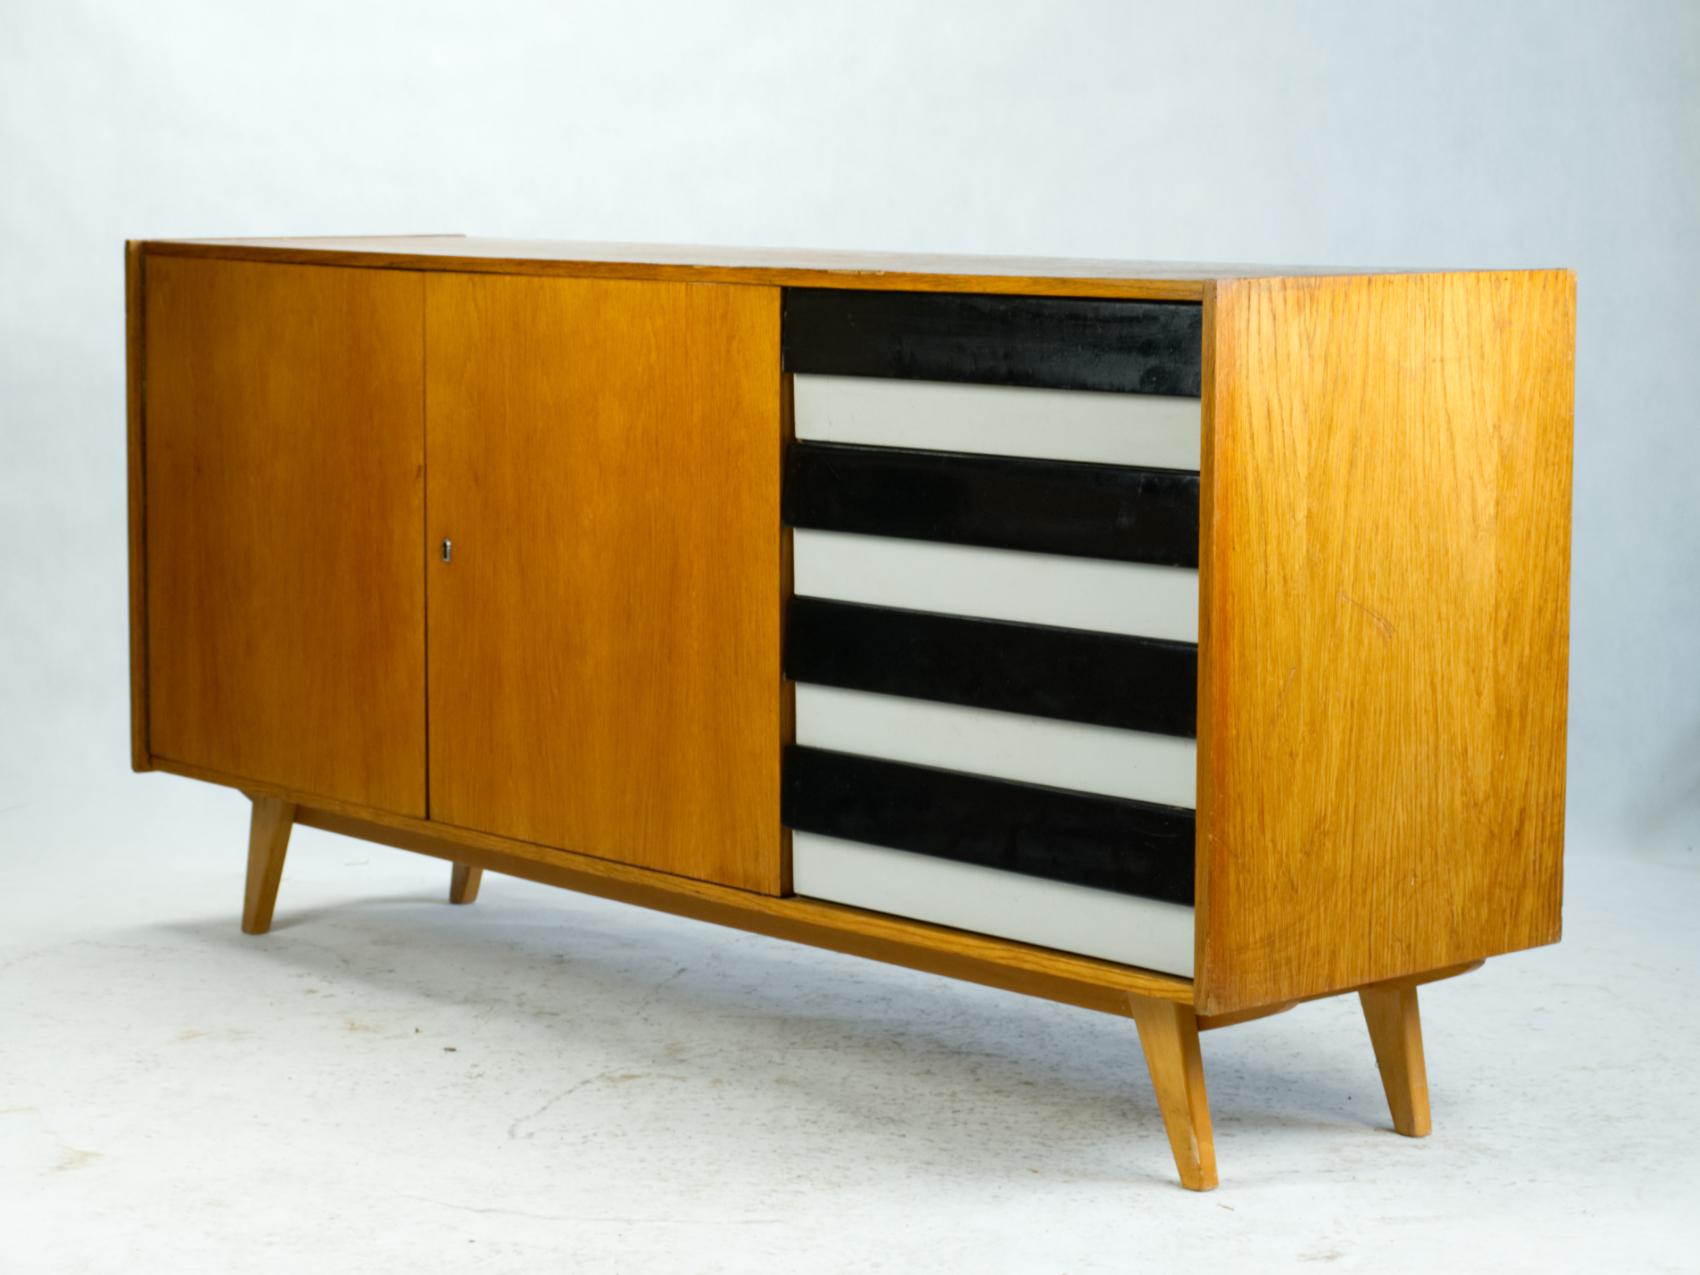 A wide cabinet designed by the Czech designer Jirí Jiroutek as a part of the famous series U-450 for the national enterprise Interier Praha. He began to work on U-450 series right after the ´58 Expo exhibition in Brussels. The success of the Czech